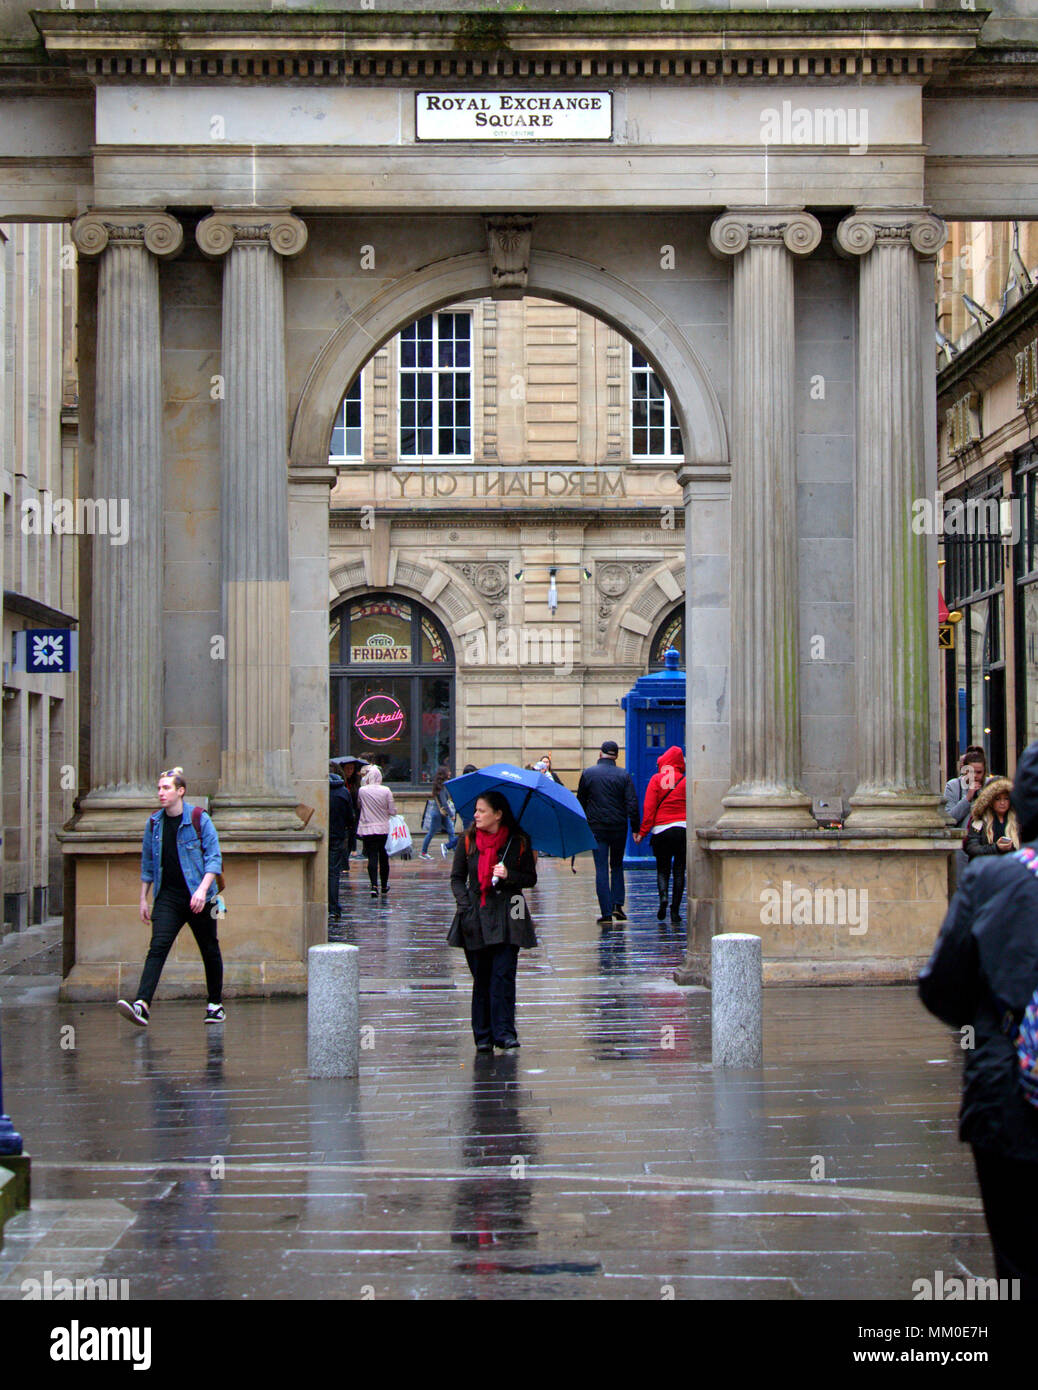 Glasgow, Scotland, UK 9th May. UK Weather raining rain blue umbrella  The Arch of royal exchange square at the heart of the city offers little for the tourist as dull wet weather pervades after the hot Bank Holiday.. Gerard Ferry/Alamy news Stock Photo